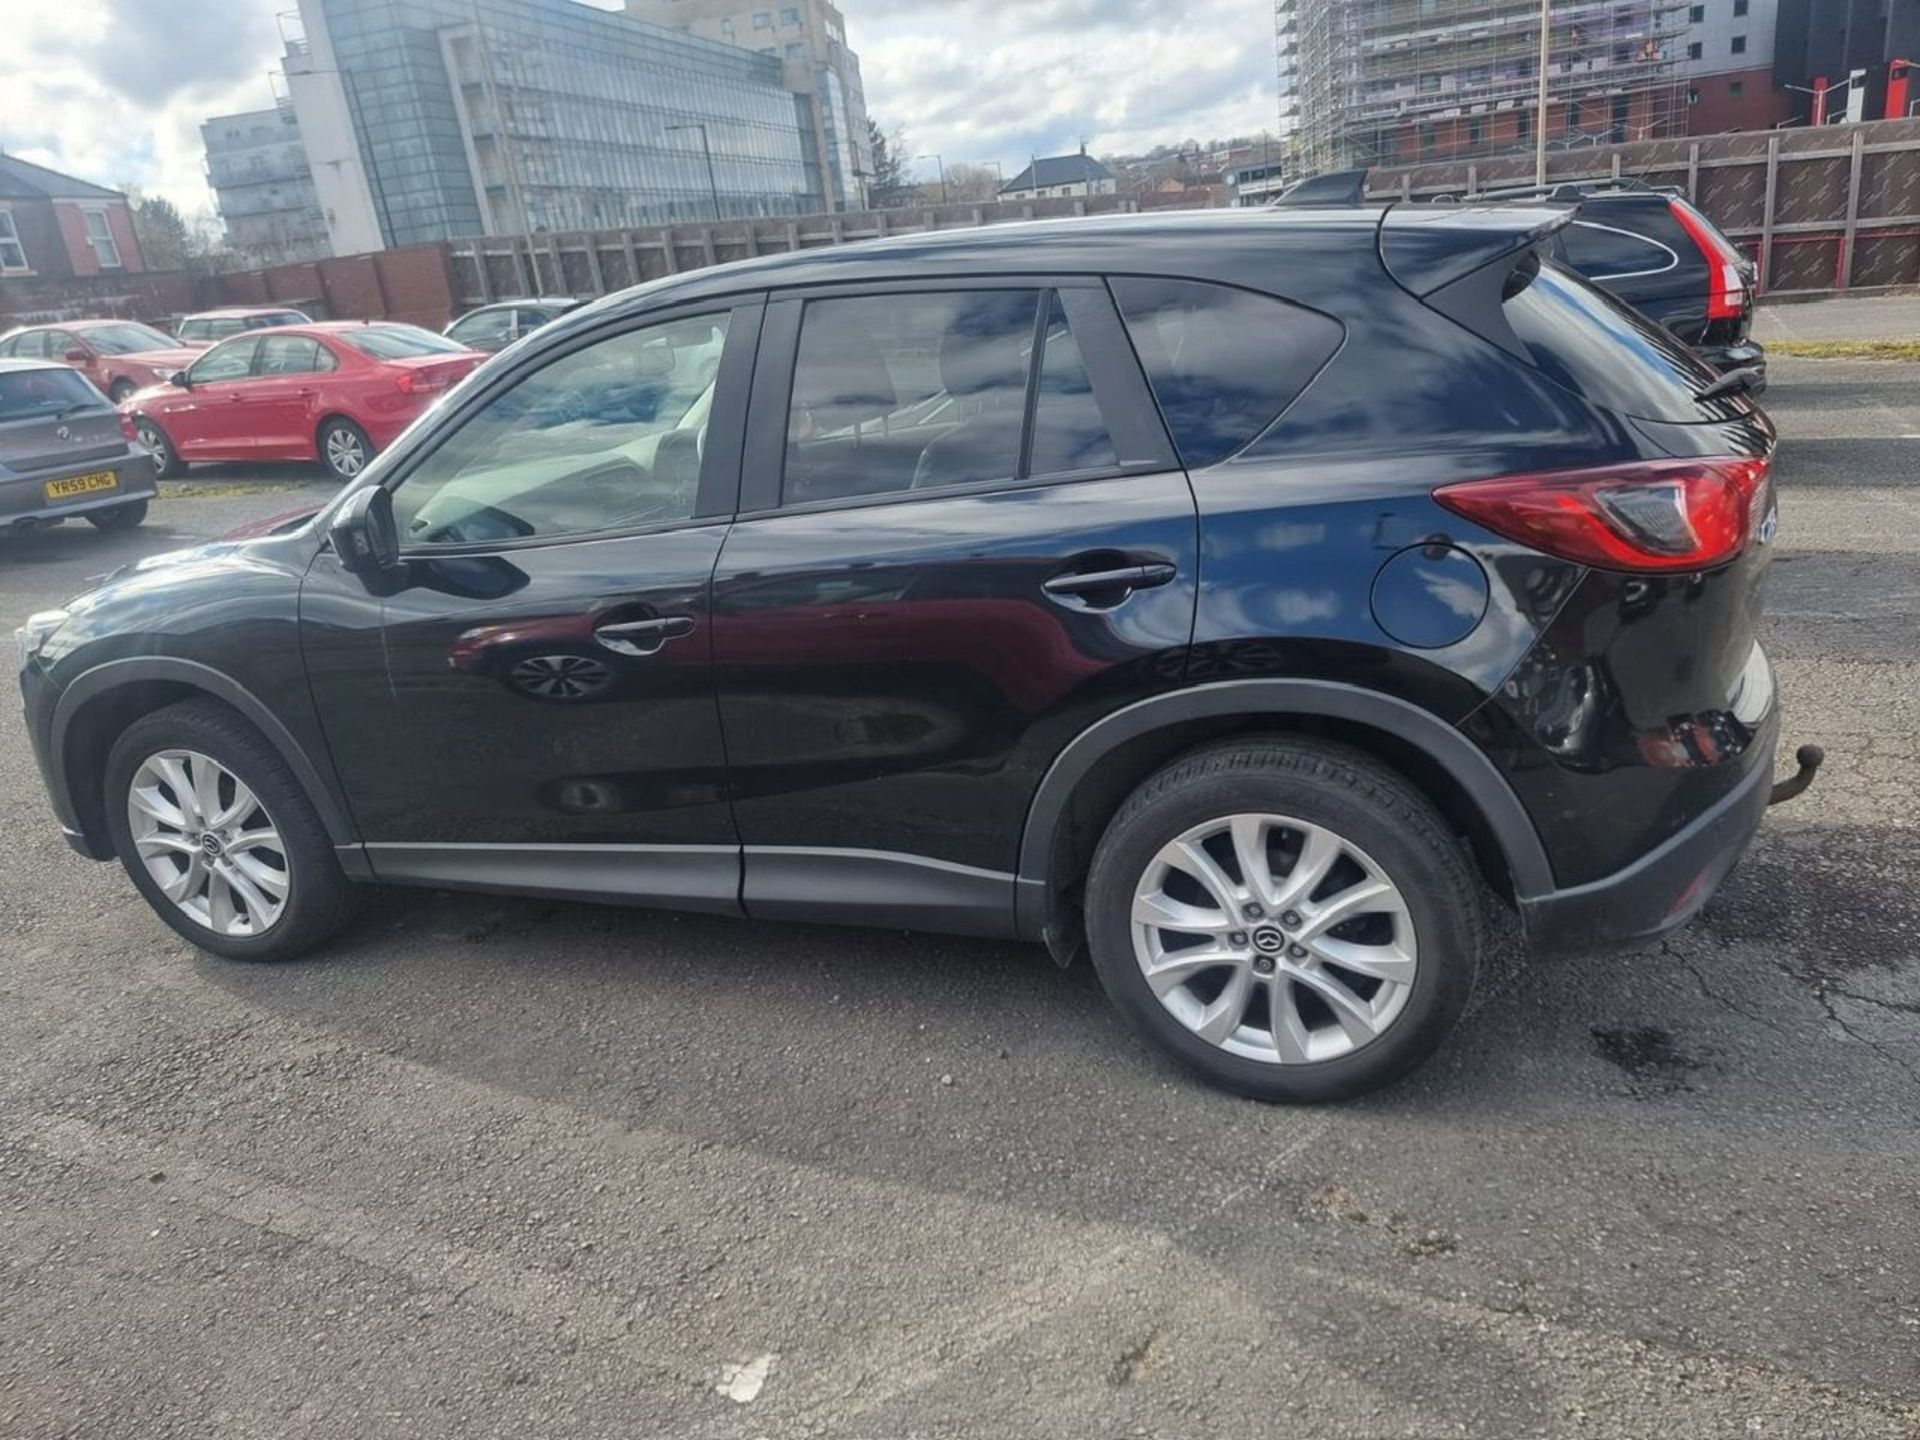 FG13 JOH MAZDA CX-5 2.2 D 150 SPORT 2WD Station Wagon. Comes with 1 key. Date of registration: 21/ - Image 3 of 9